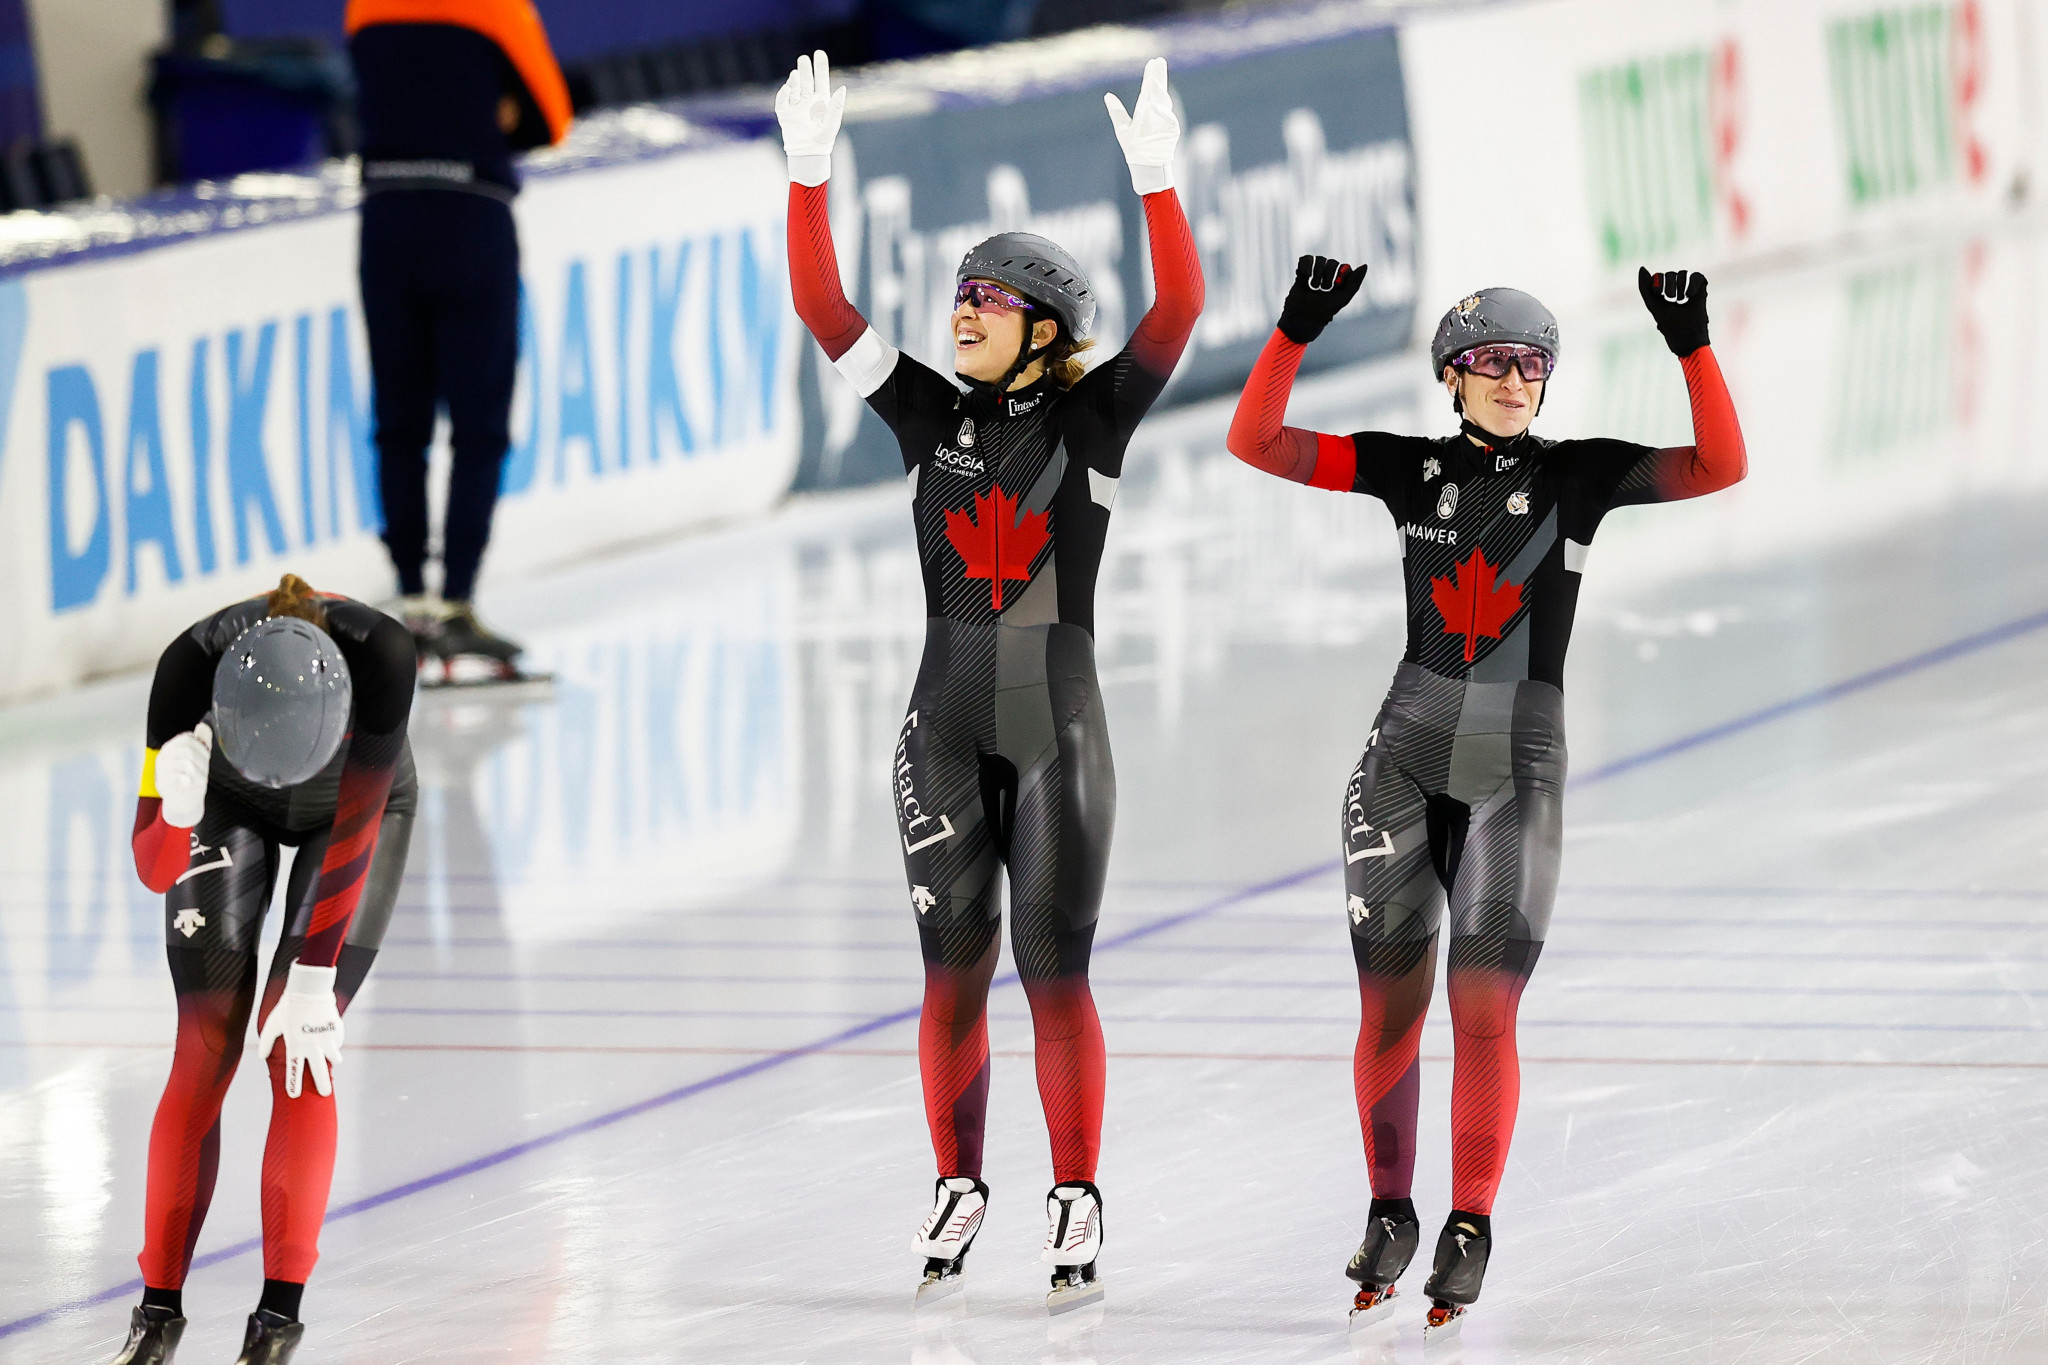 Canada won the women's team pursuit at the ISU Speed Skating World Cup in Heerenveen in a track record time ©Getty Images